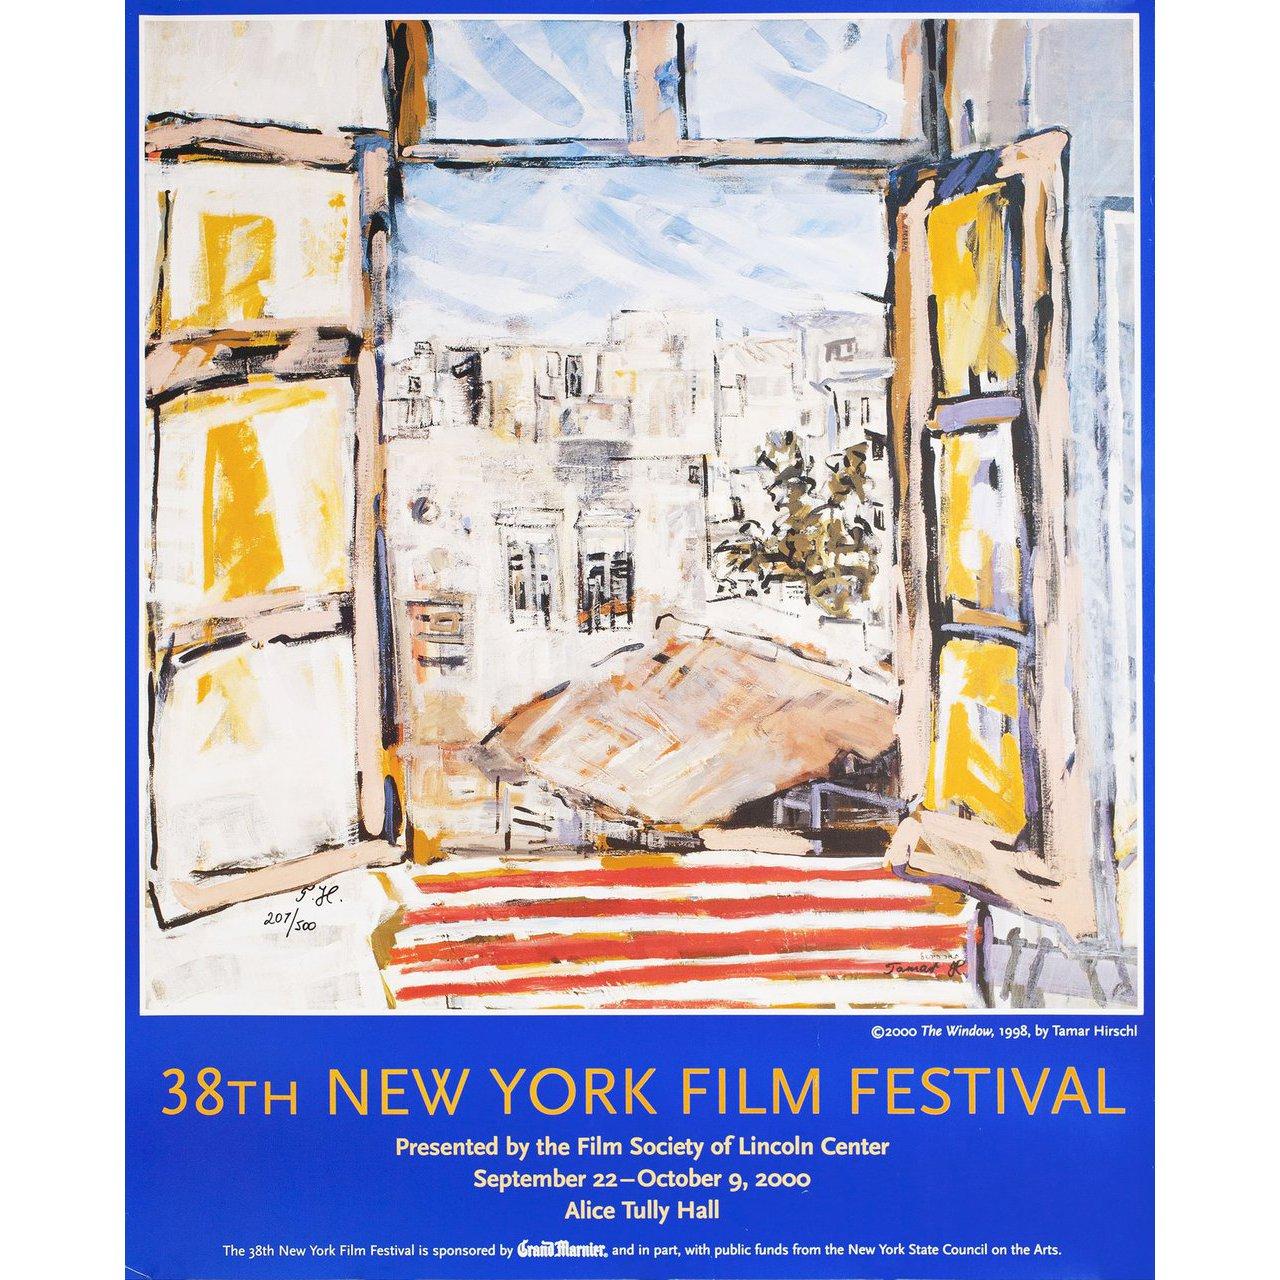 Original 2000 U.S. poster by Tamar Hirschl for the 1963 festival New York Film Festival. Signed by Tamarf Hirschl. Fine condition, rolled. Please note: the size is stated in inches and the actual size can vary by an inch or more.
 